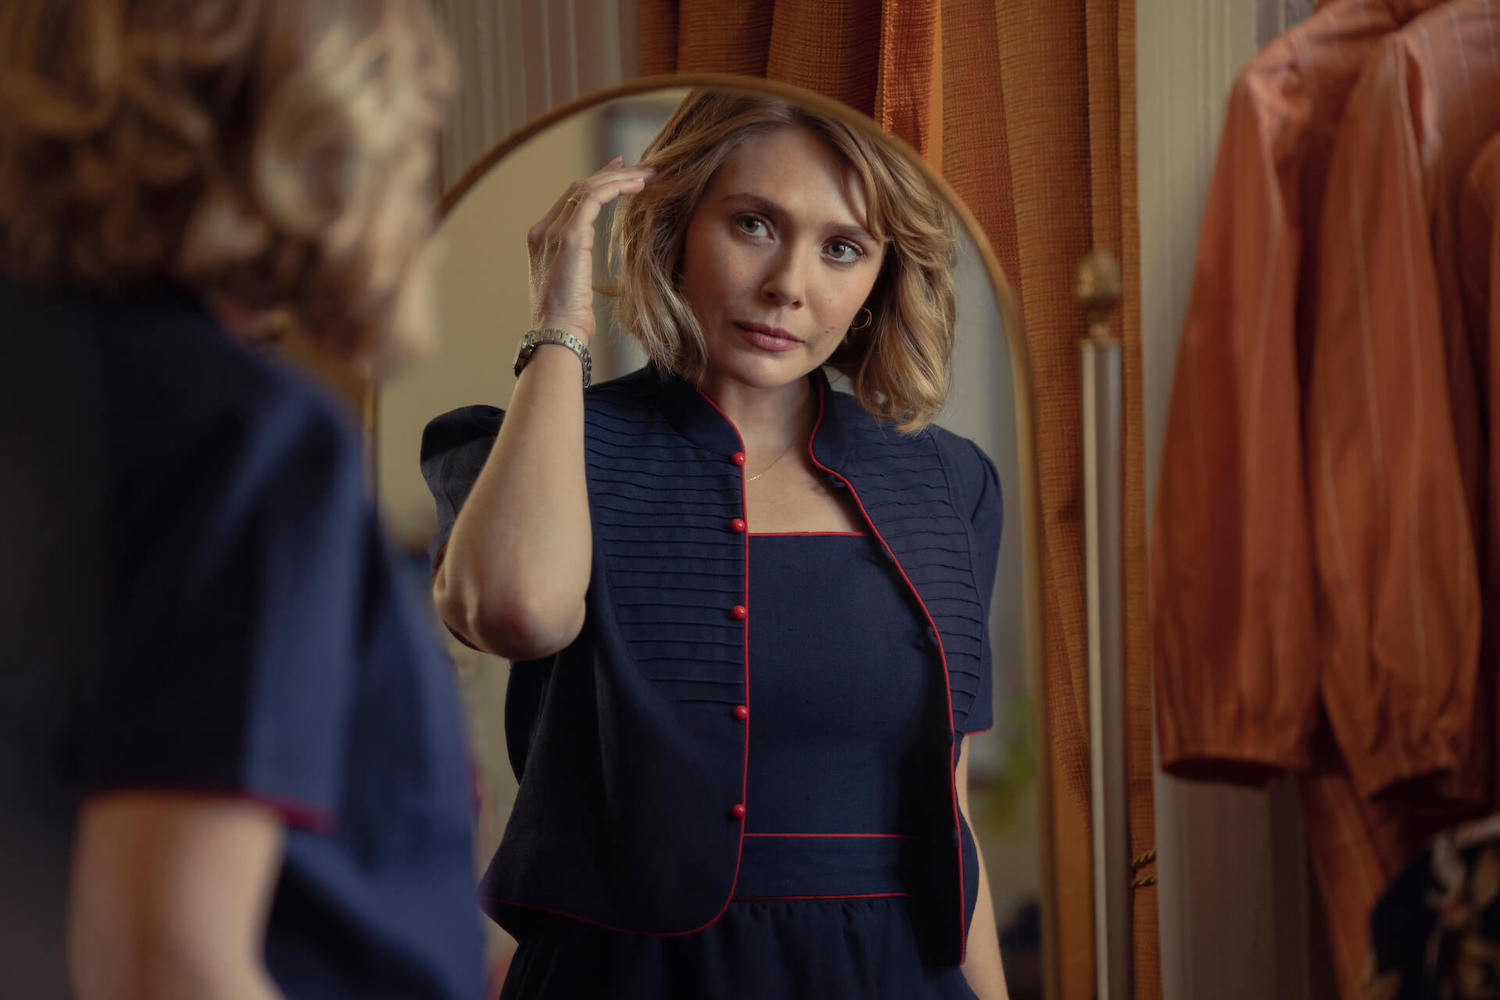 HBO Max 'Love and Death' stars Elizabeth Olsen as Candy Montgomery, seen here wearing a navy sweater and dress while looking into a mirror in a production still.